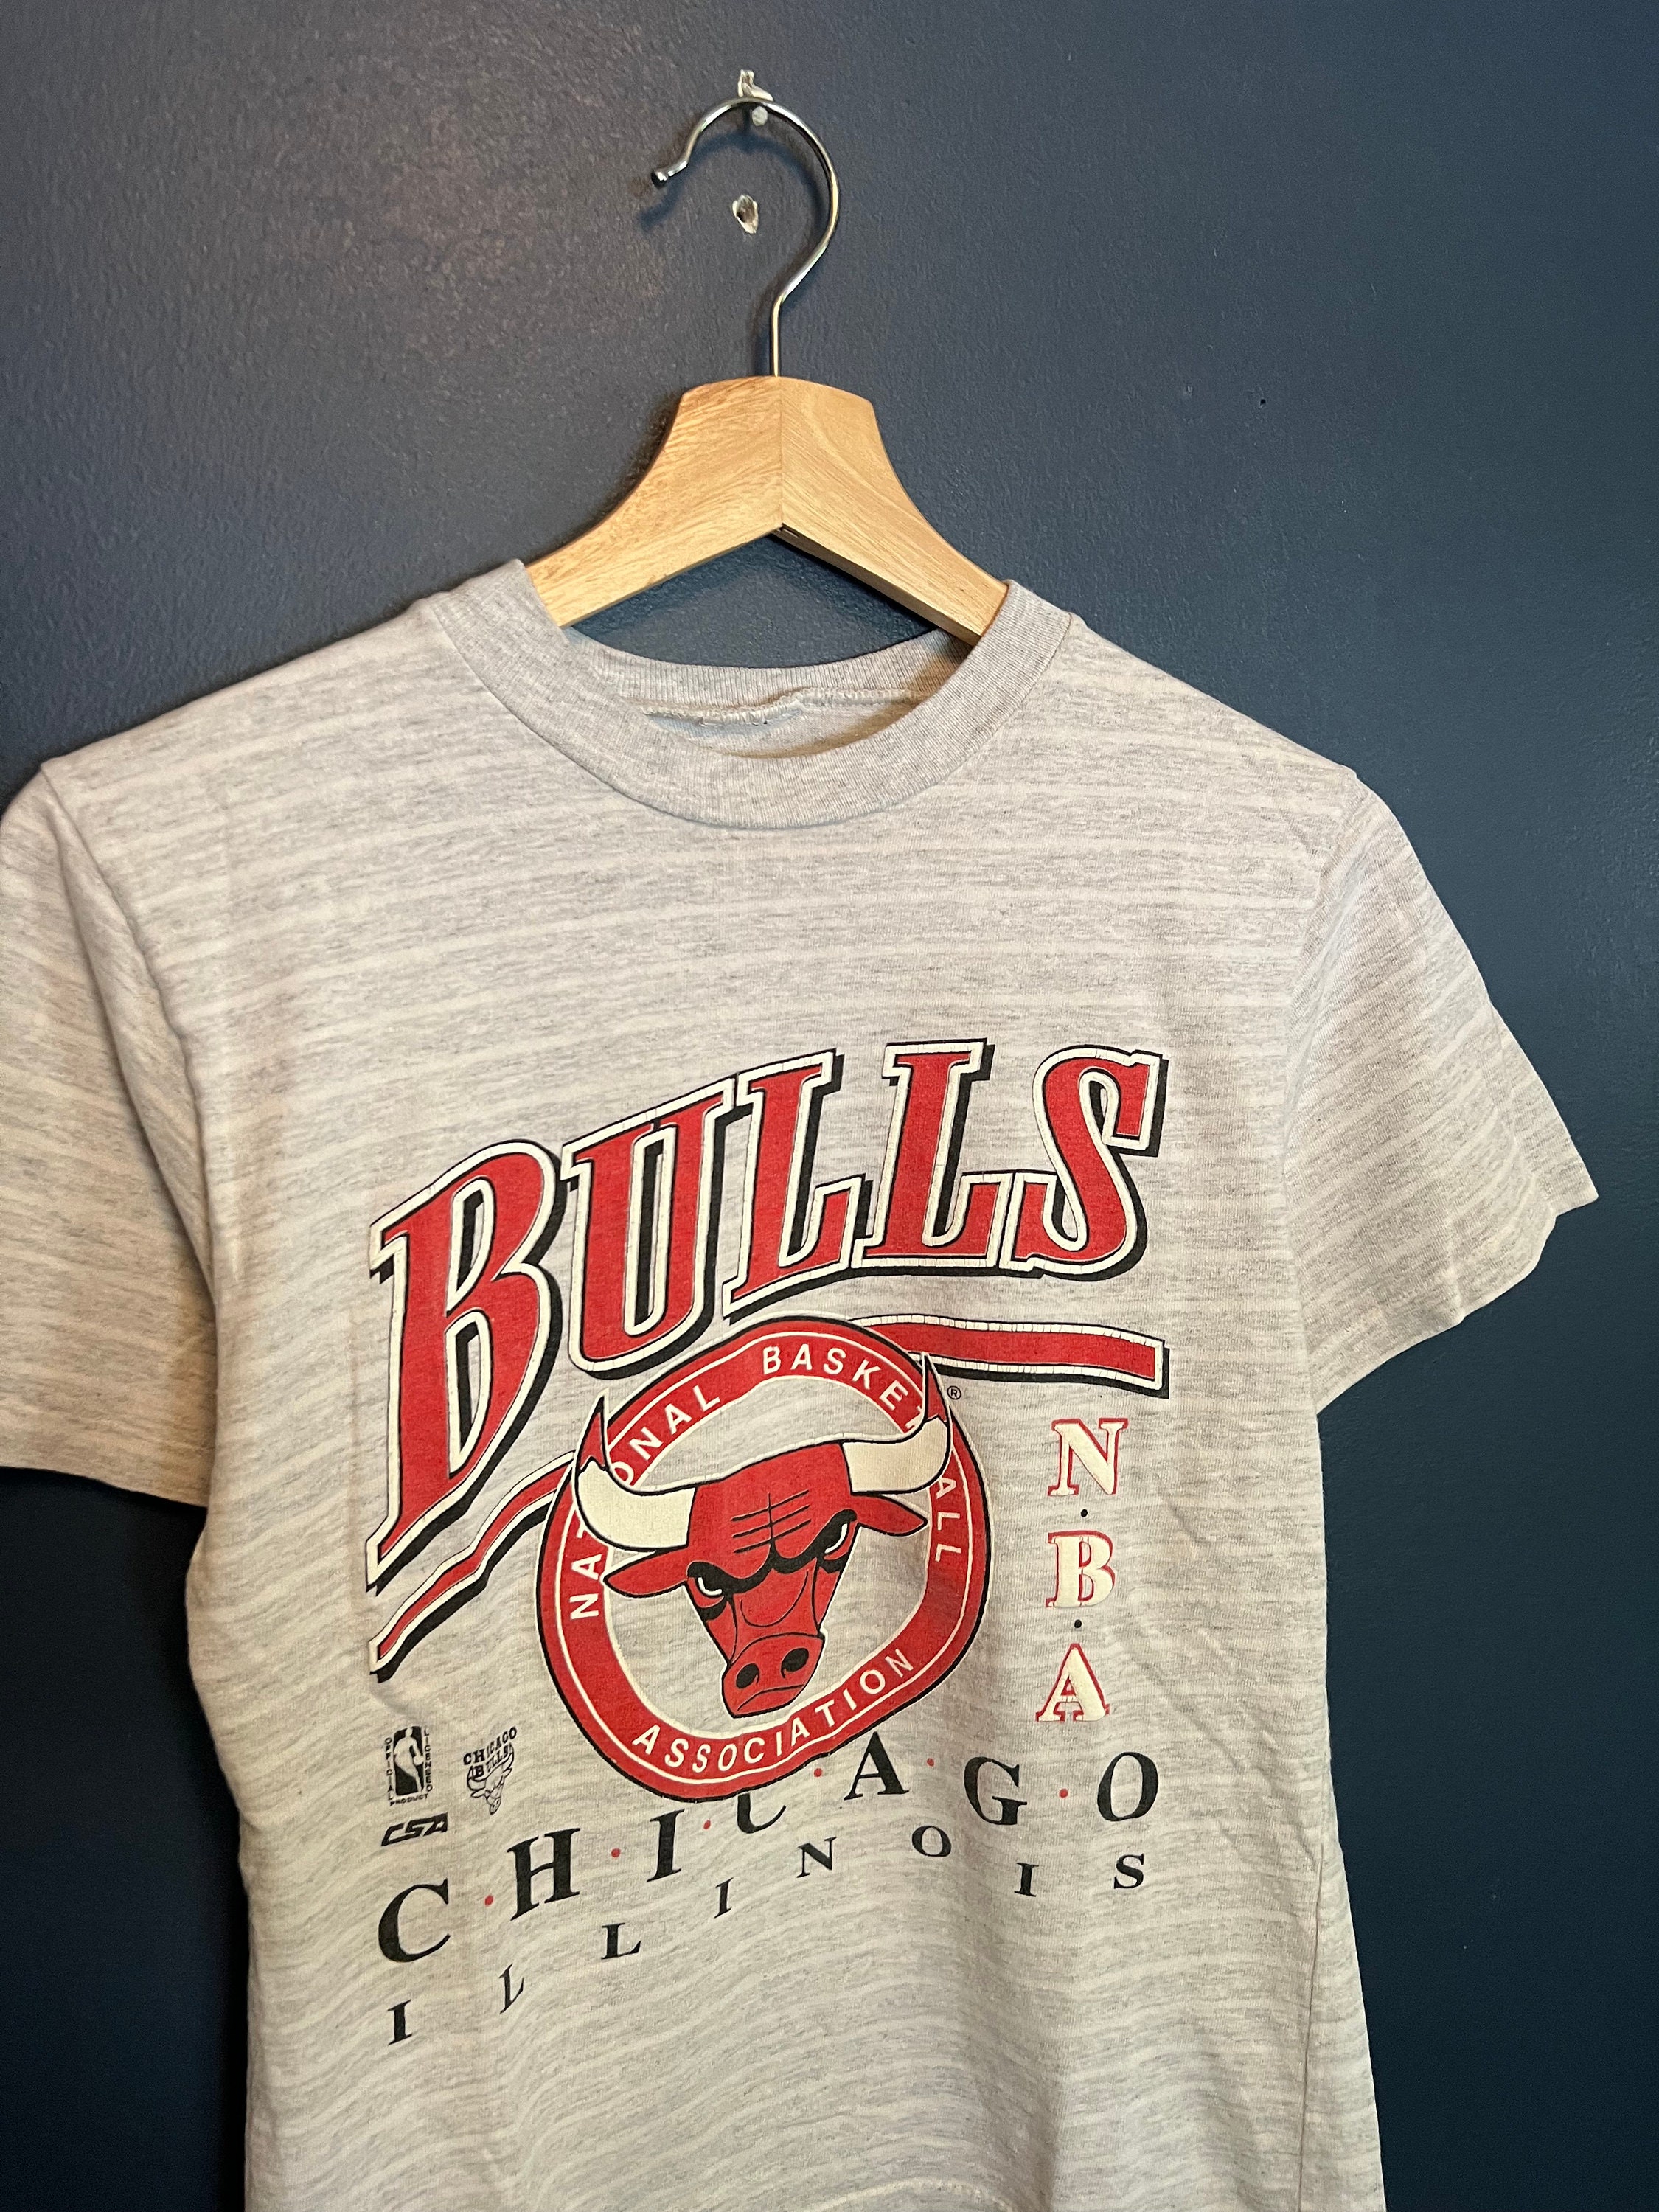 Buy Vintage Chicago Bulls Shirt Online In India -  India